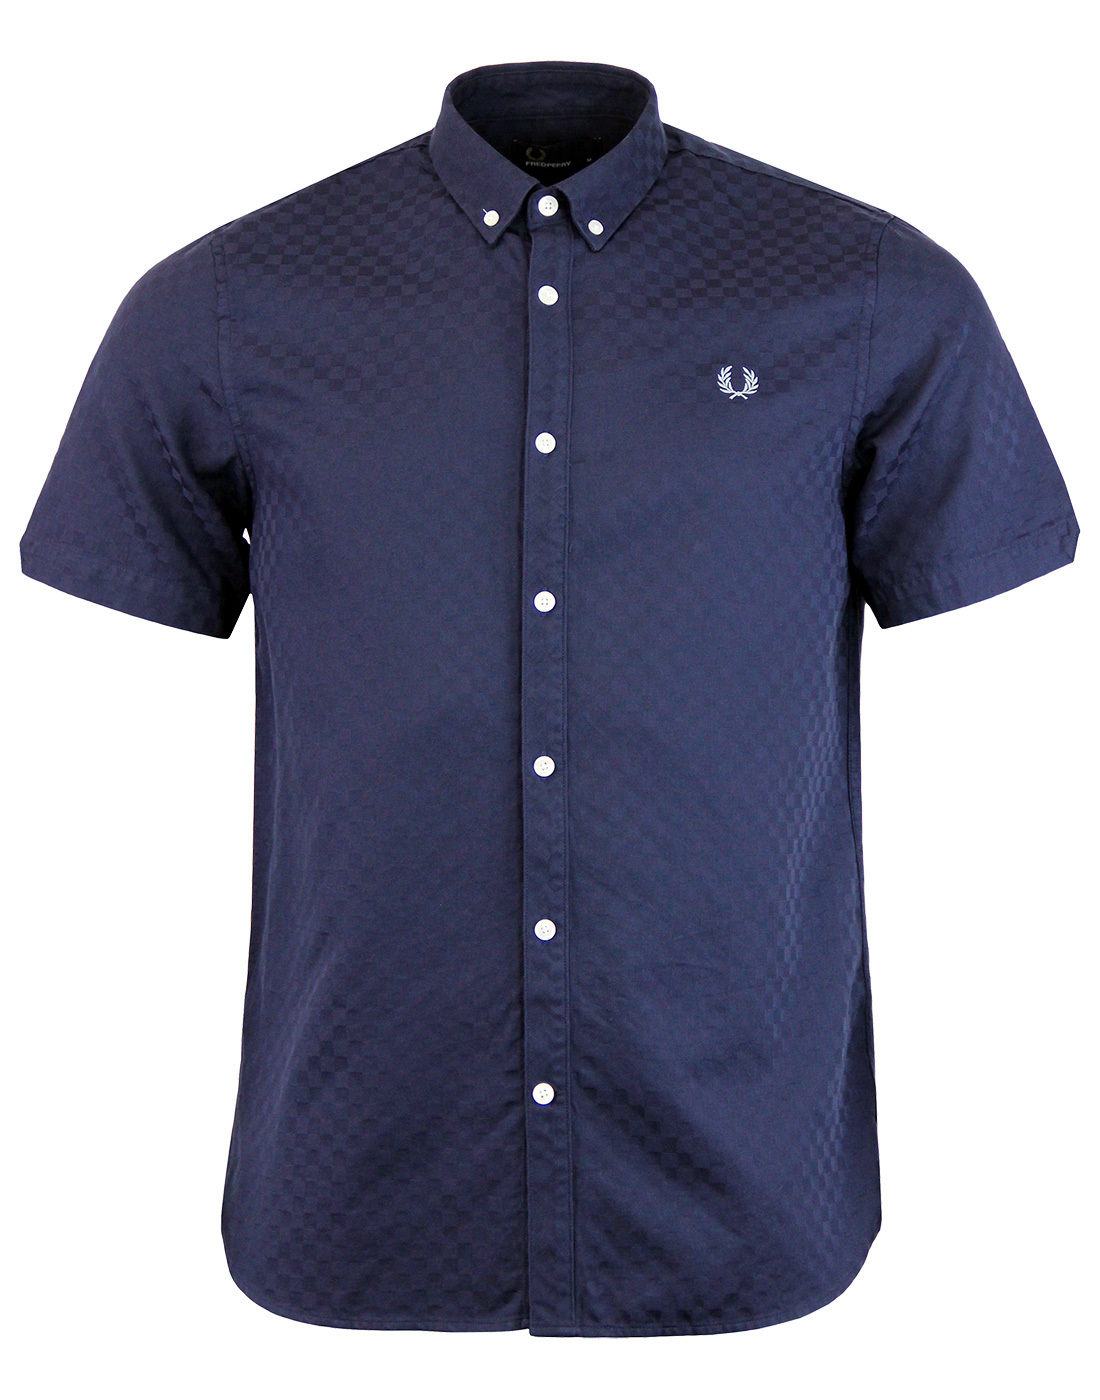 FRED PERRY Retro Mod Indie Chequerboard S/S Shirt